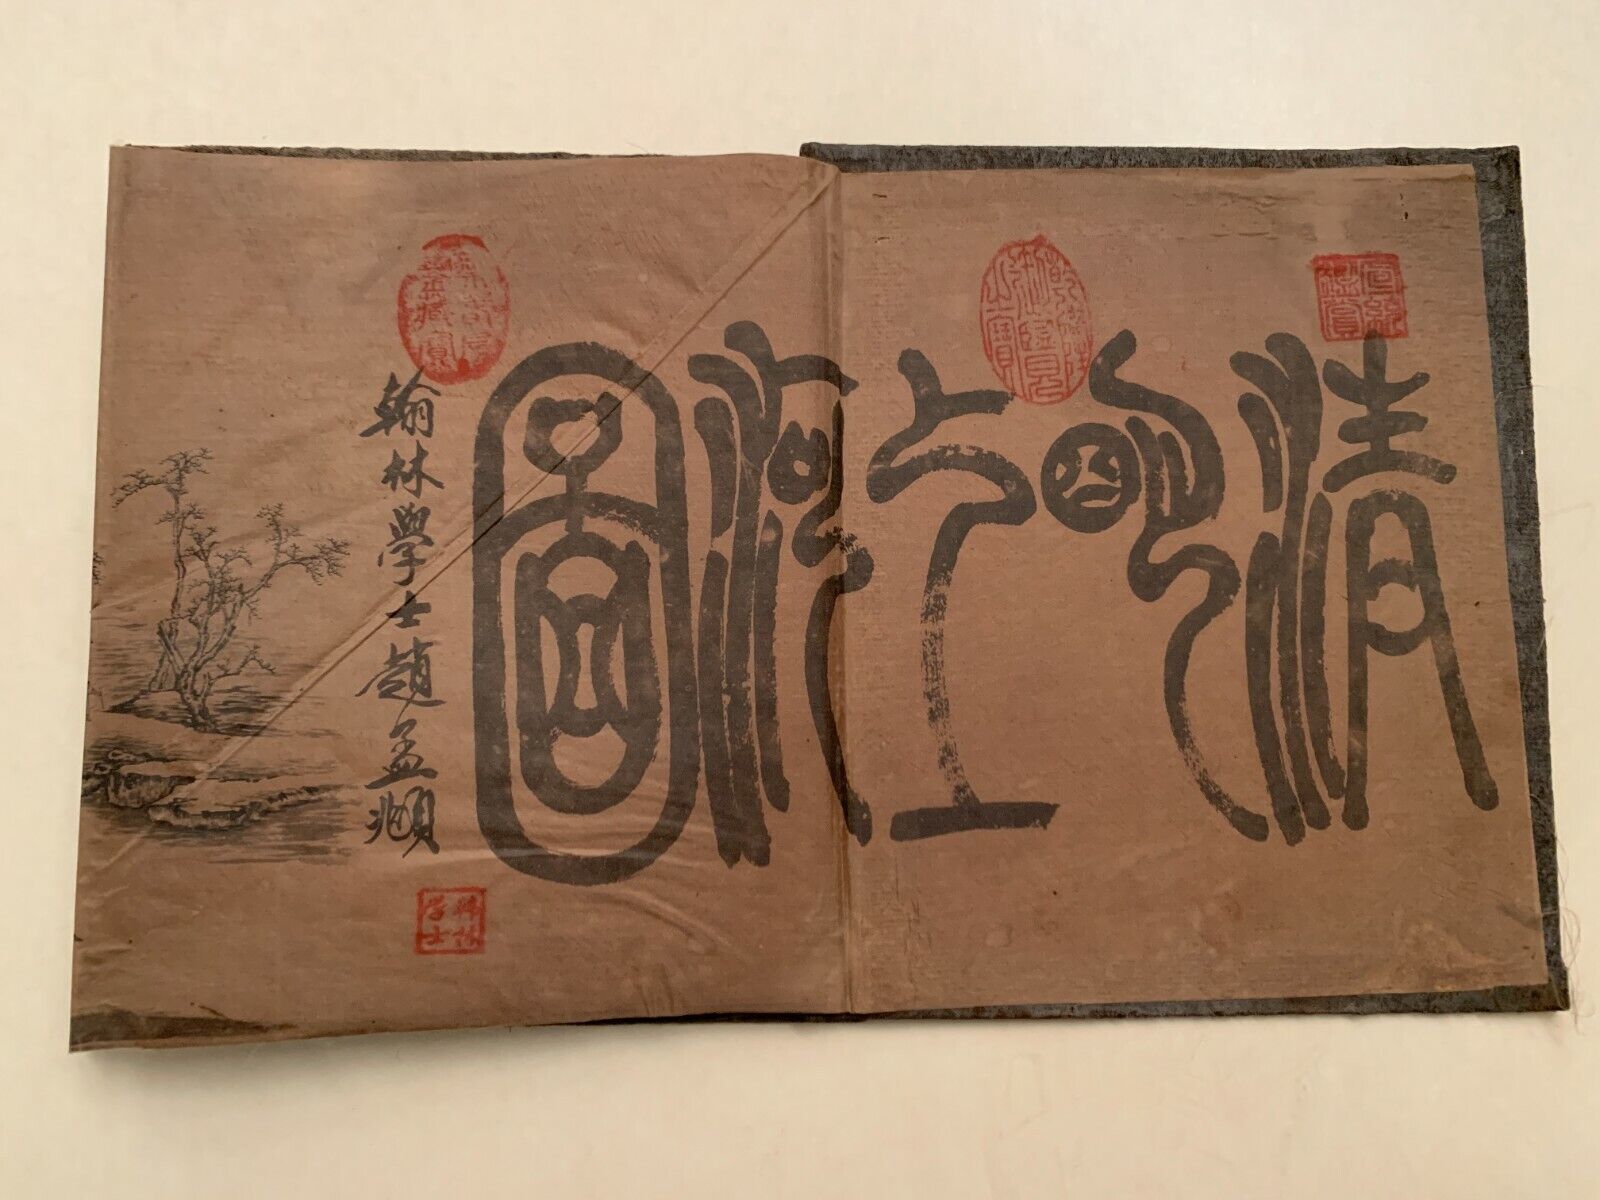 Vintage Chinese Printed Classical Landscape Album Book